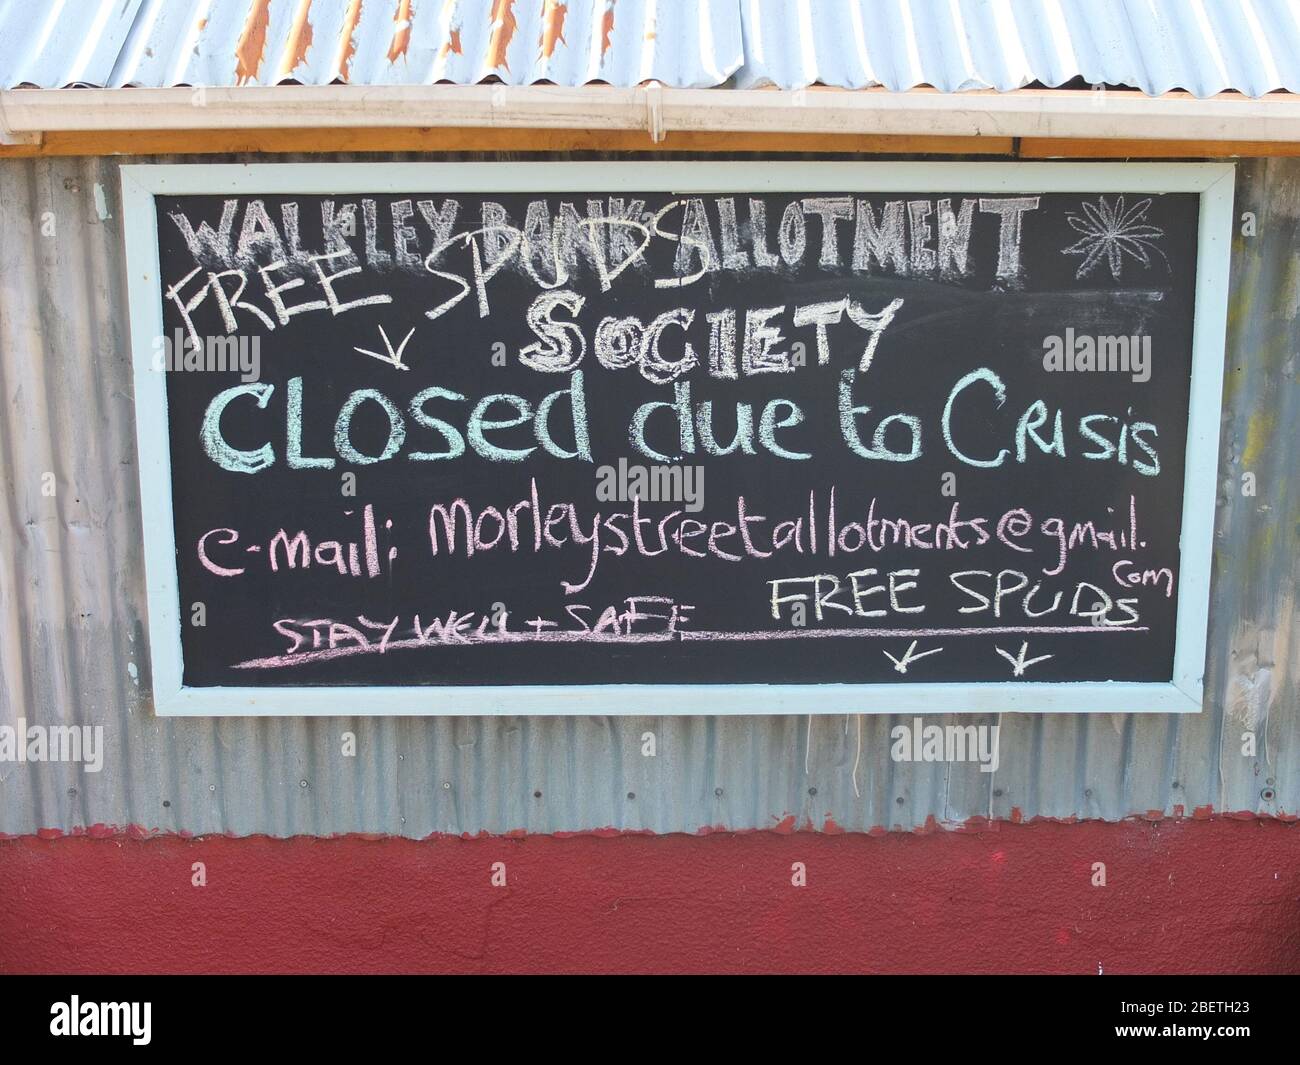 A sign on a blackboard outside Walkley Bank Allotment Society hut saying 'Closed due to CRISIS' [Coronavirus] and offering free spuds Stock Photo